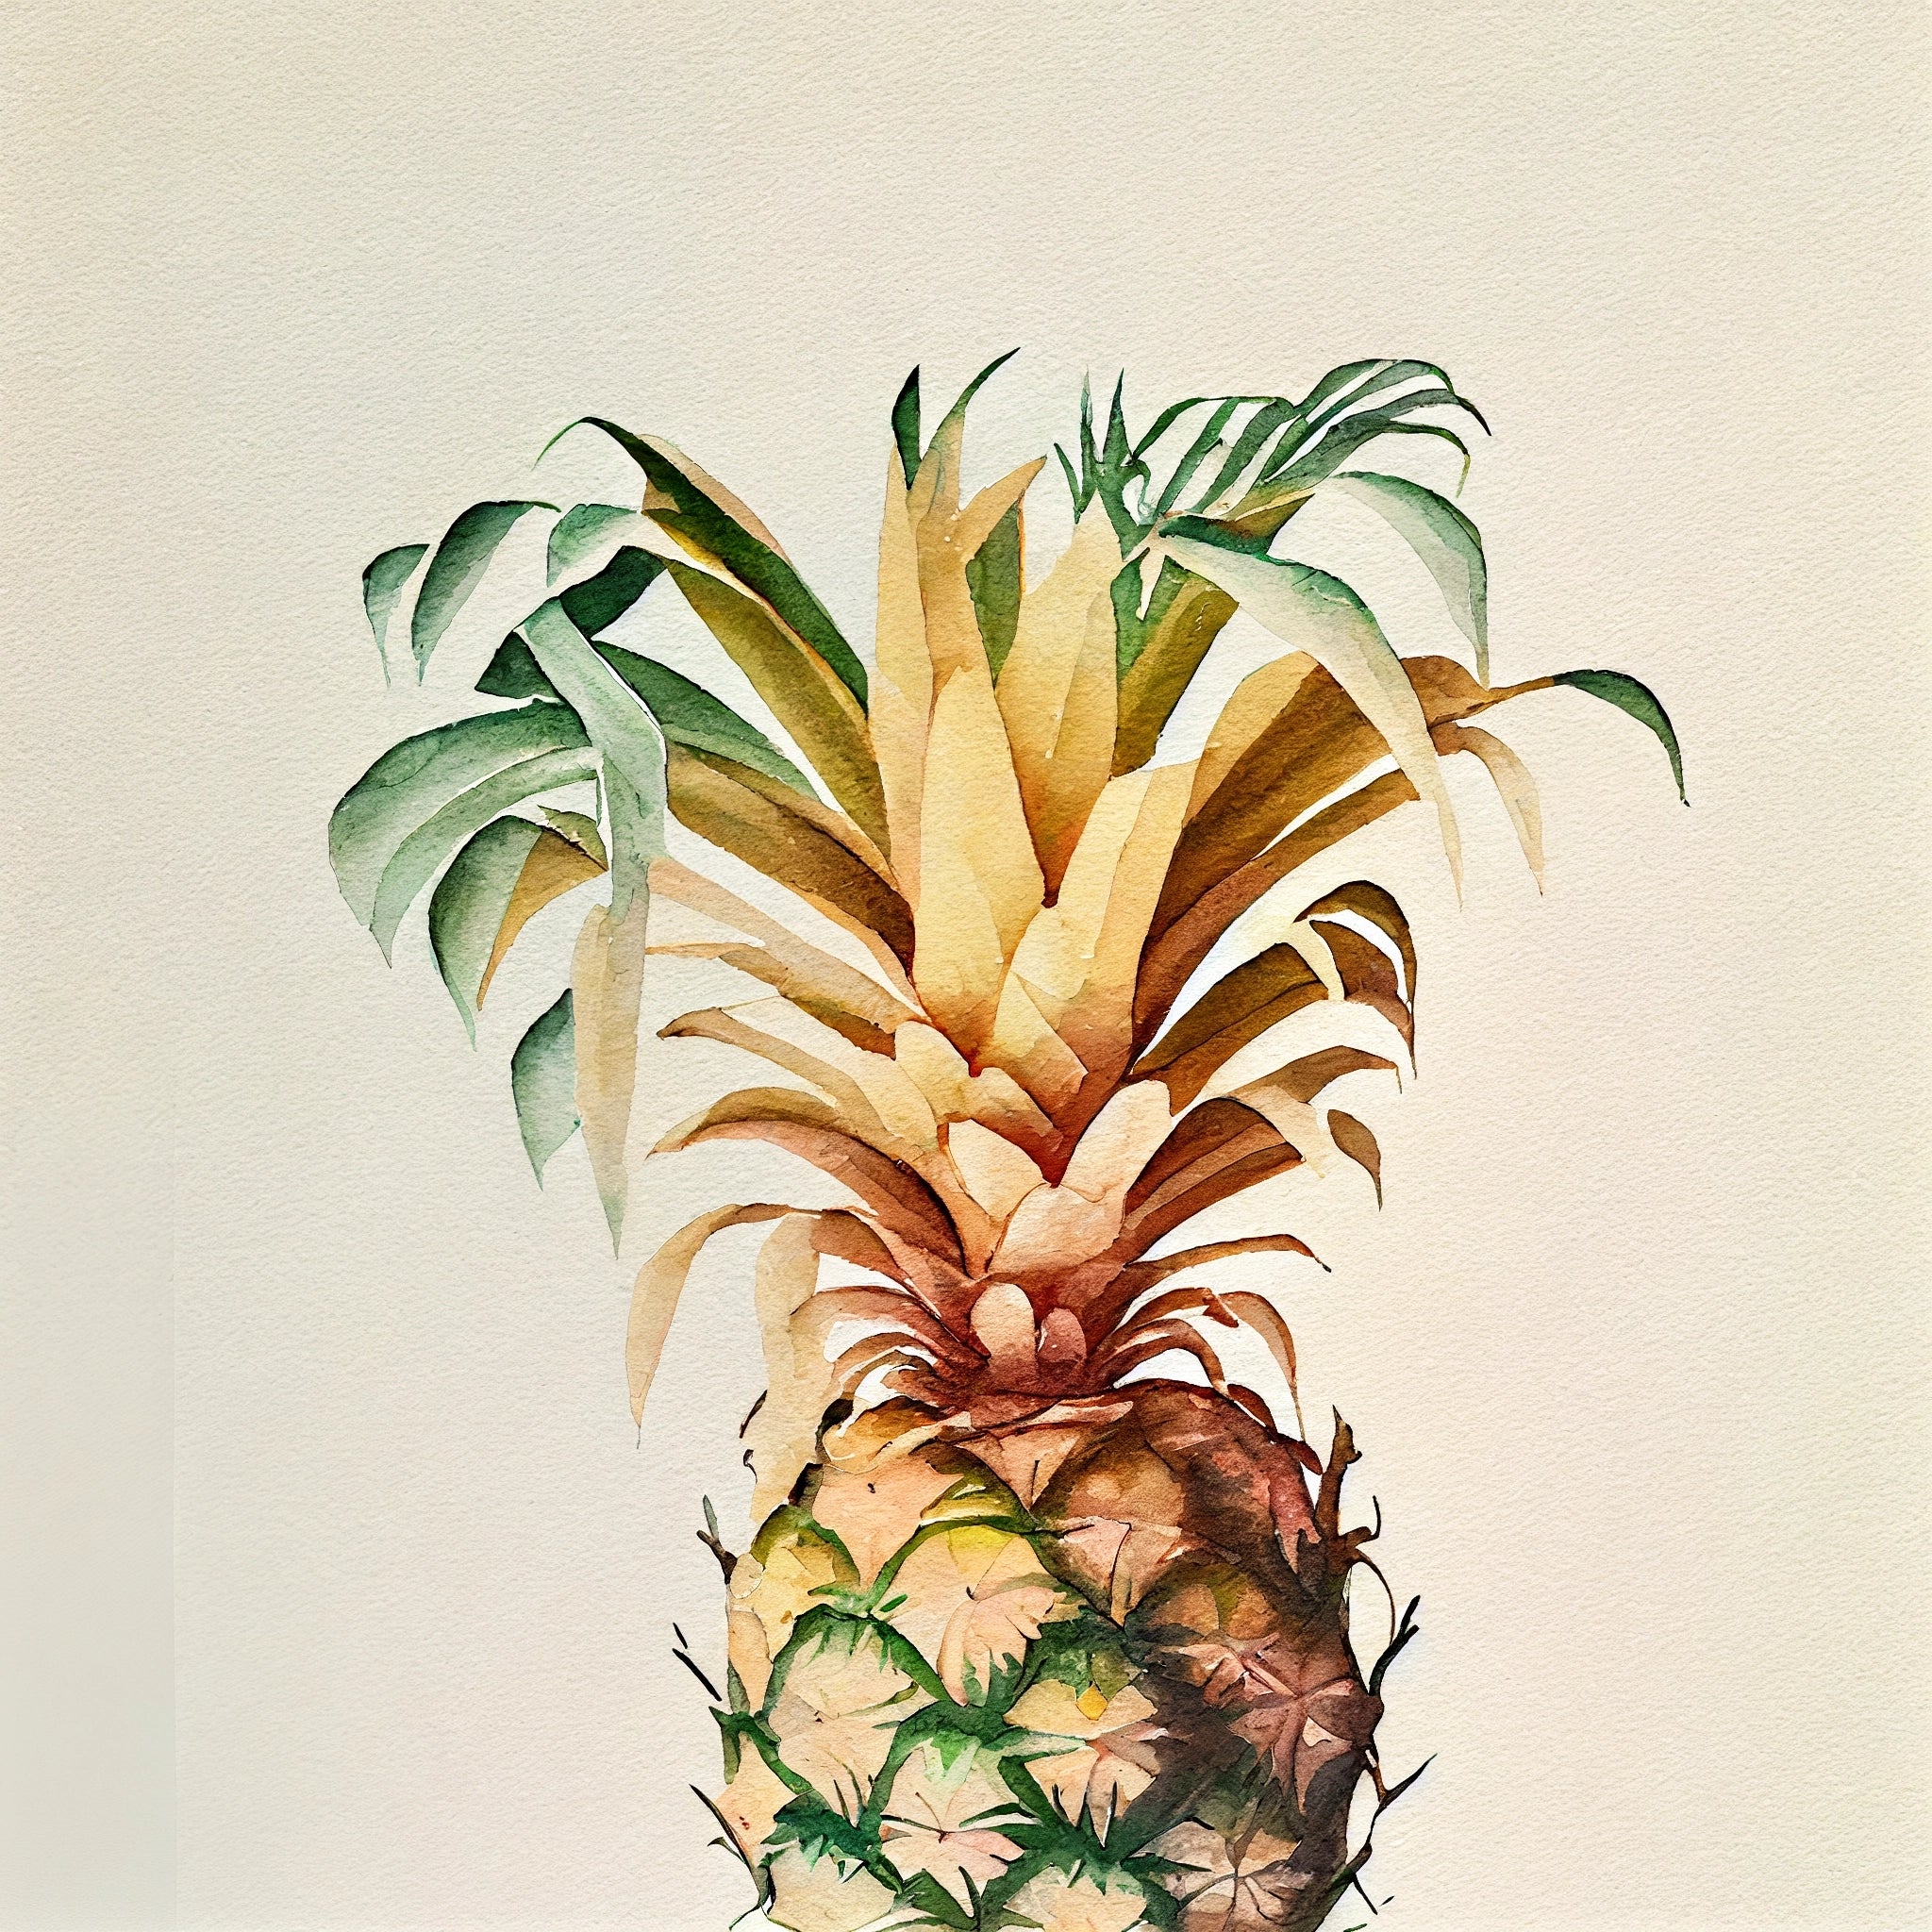 Tropical Elegance: A Delicate Watercolor Print of Pineapple Leaves on a Light Background